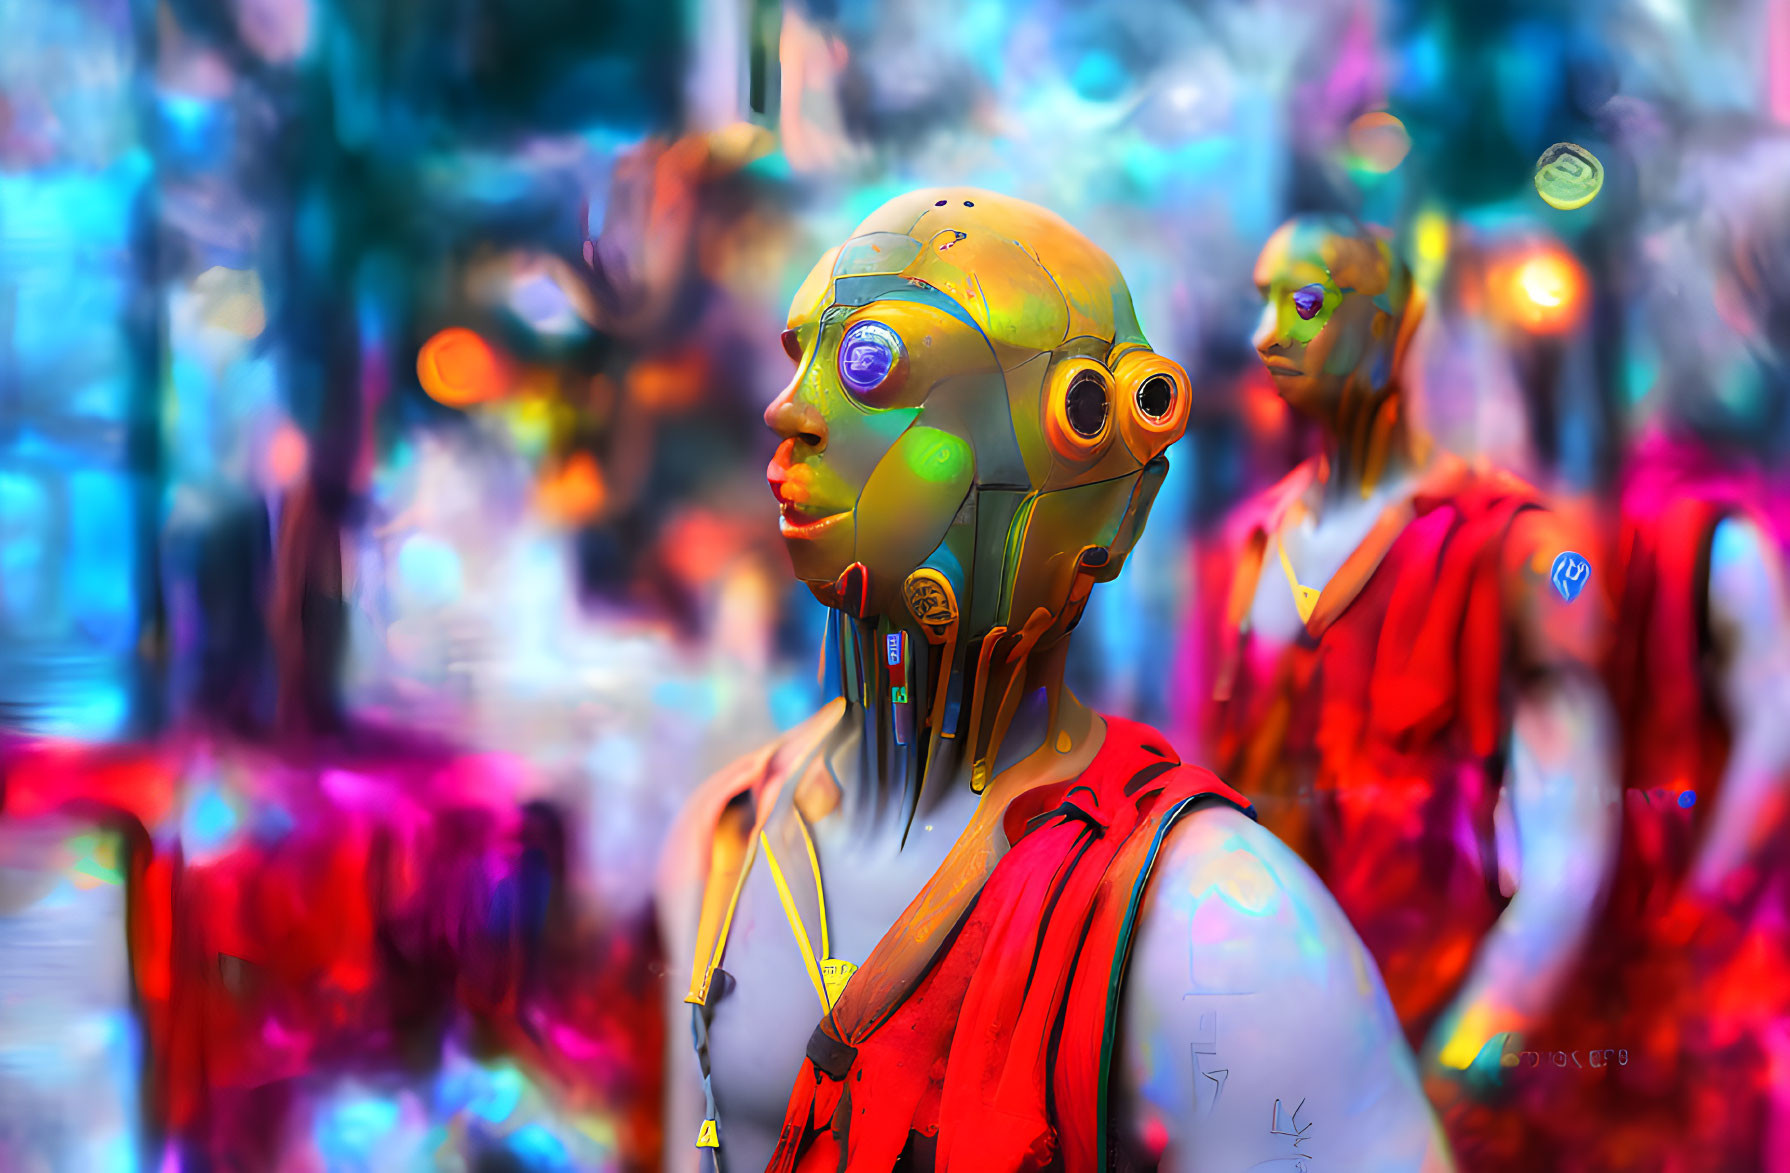 Colorful Abstract Digital Artwork: Humanoid Figures with Mechanical Features